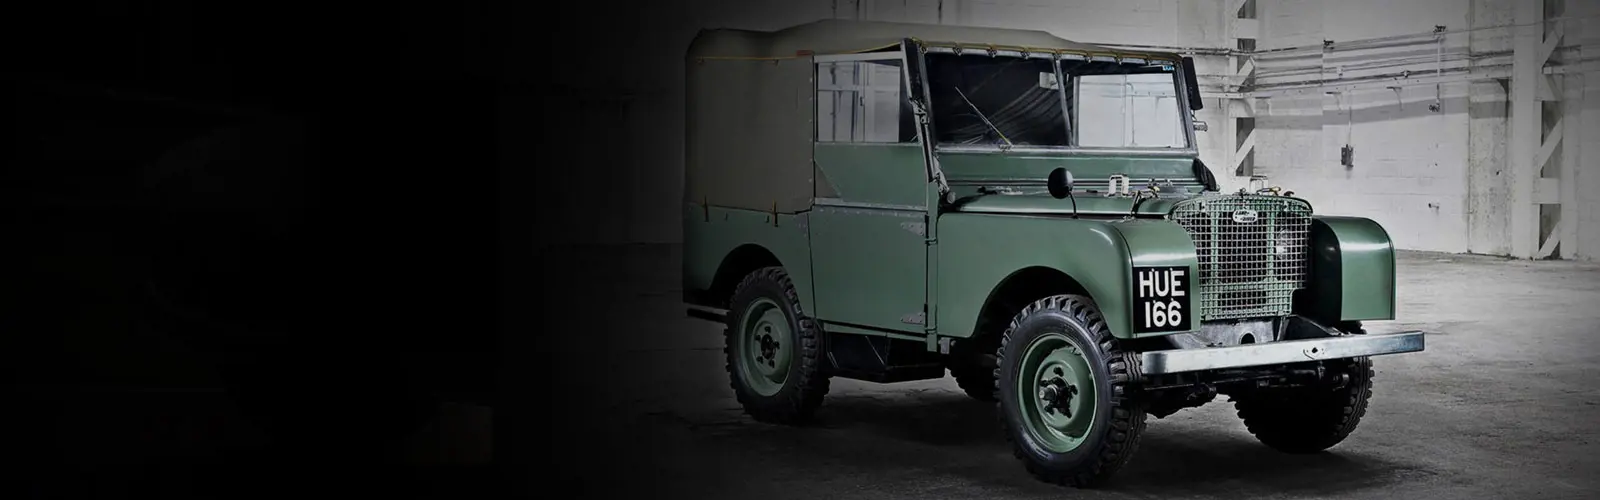 Land Rover Heritage: Over 70 Years And Still Going Strong